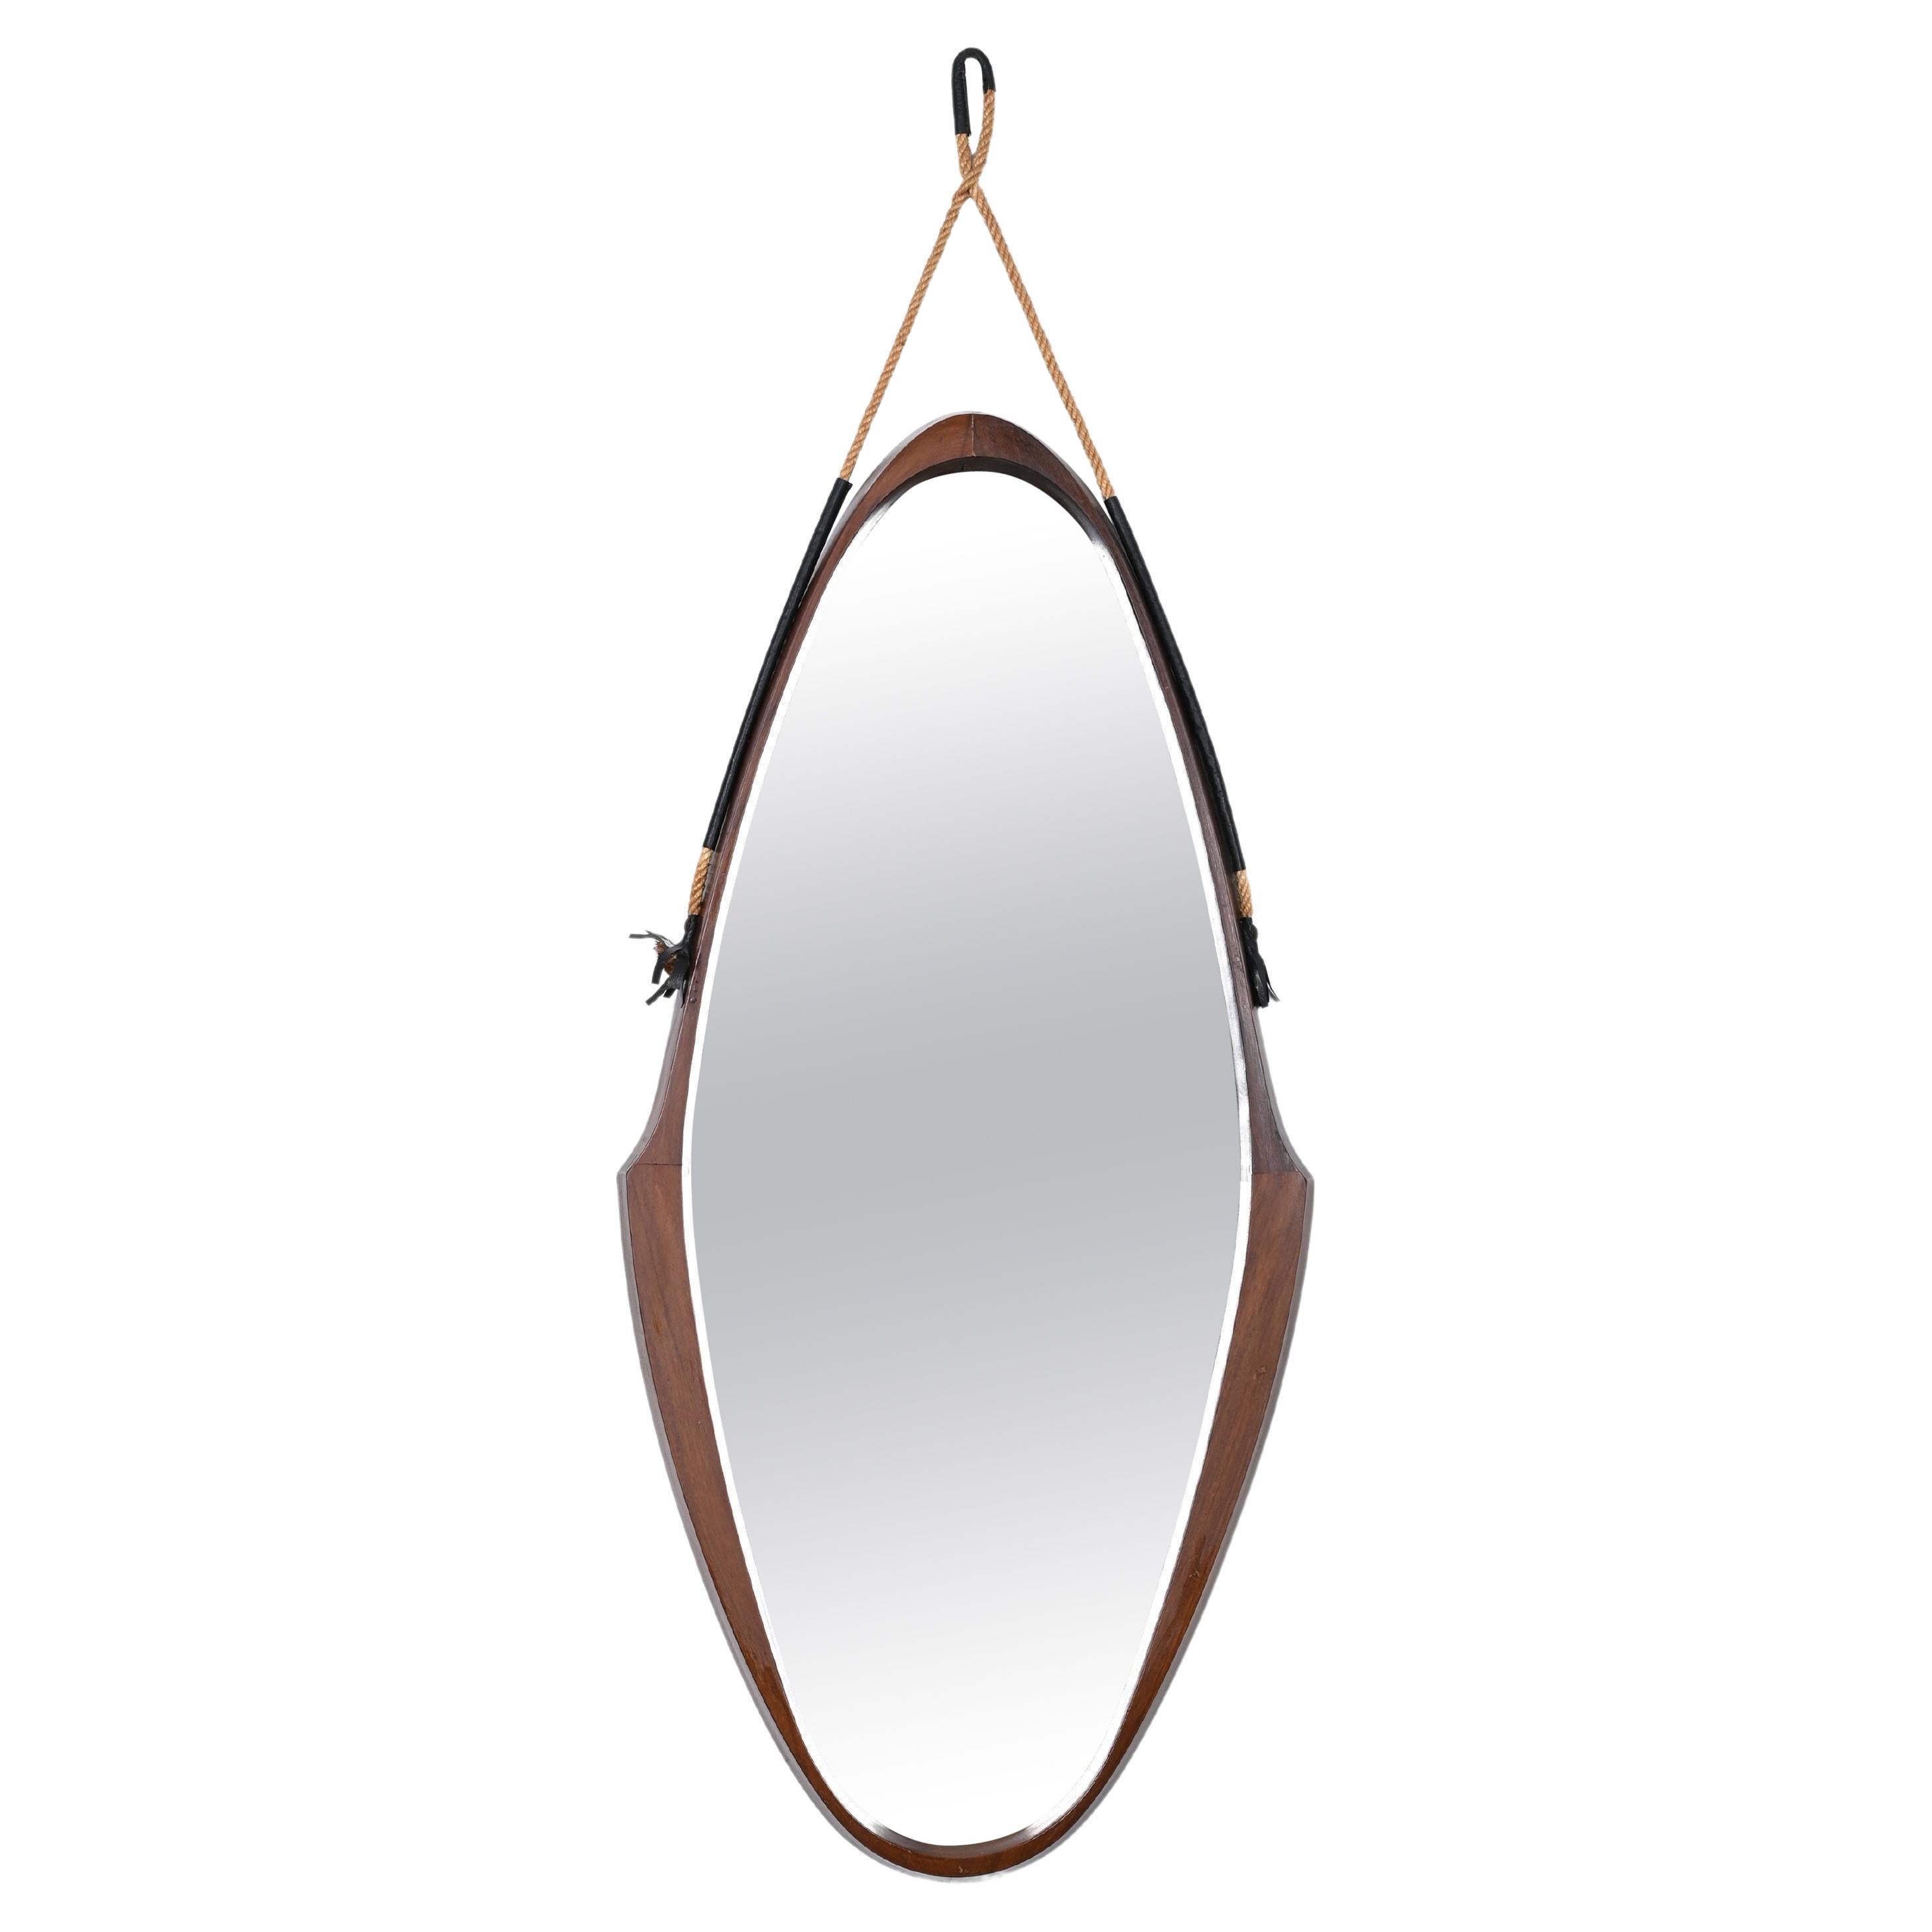 Midcentury Italian Oval Mirror in Curved Teak, Rope and Leather, 1960s